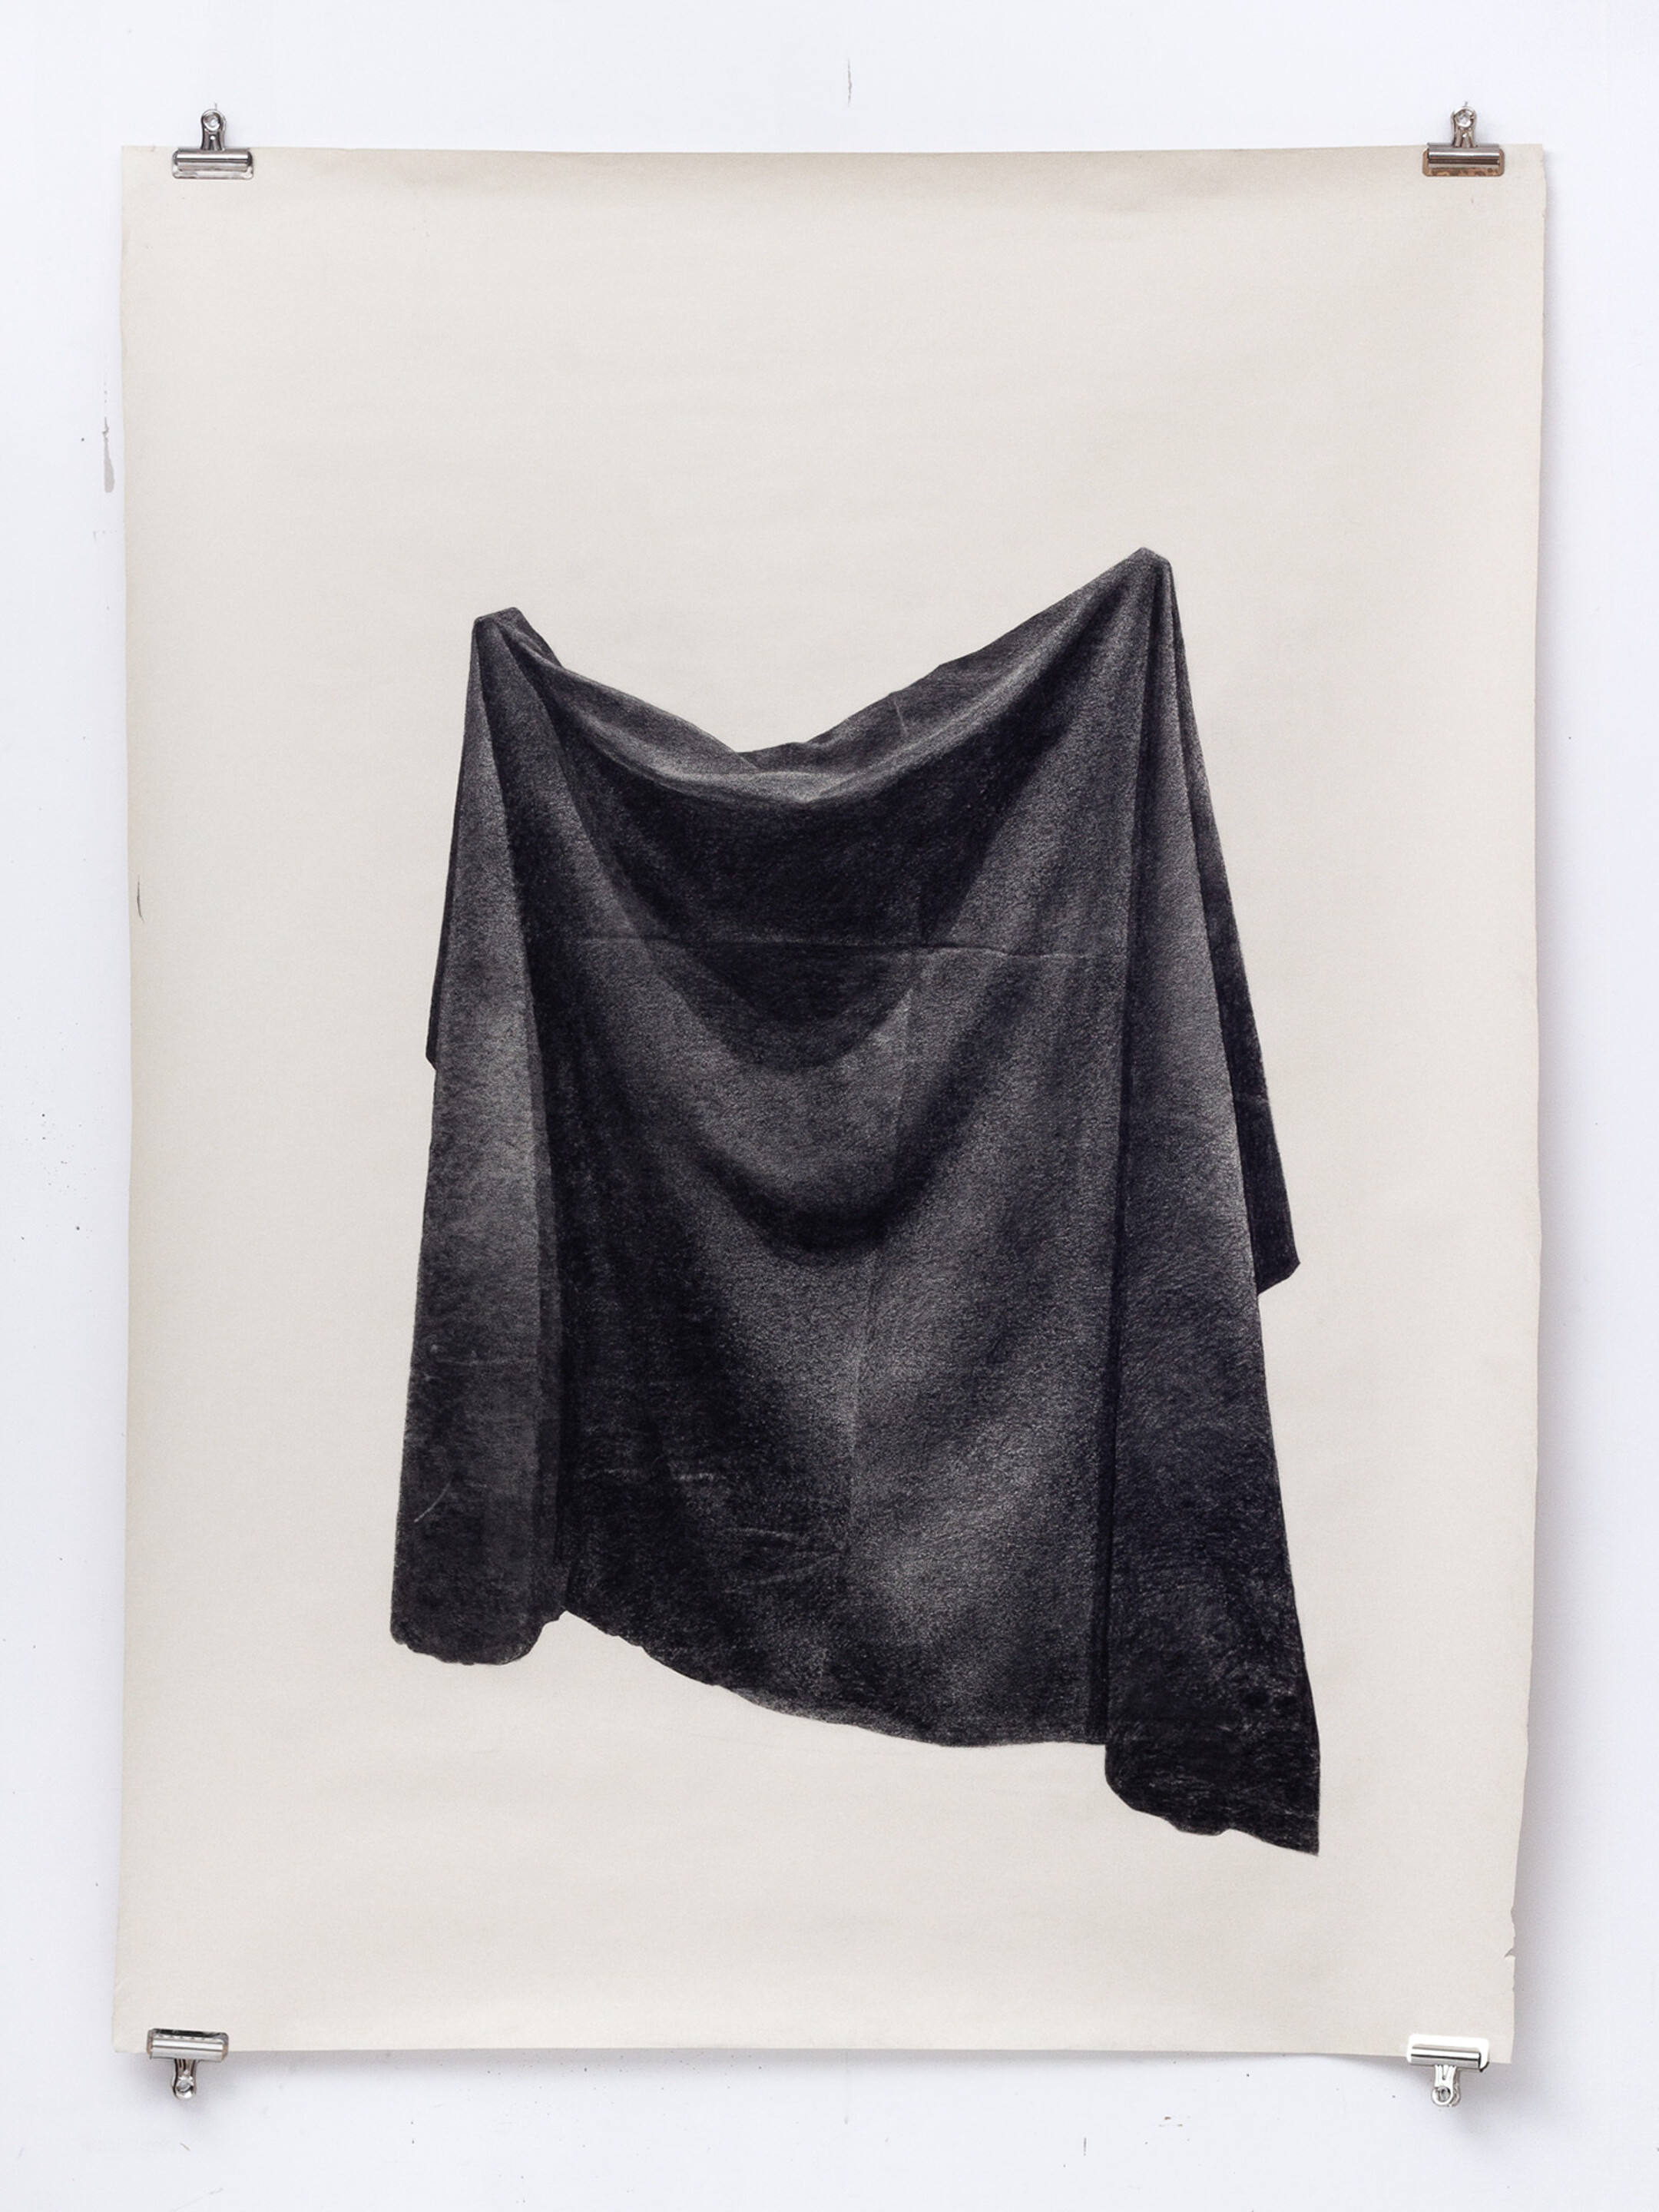 Drawing of draped fabric in charcoal on paper